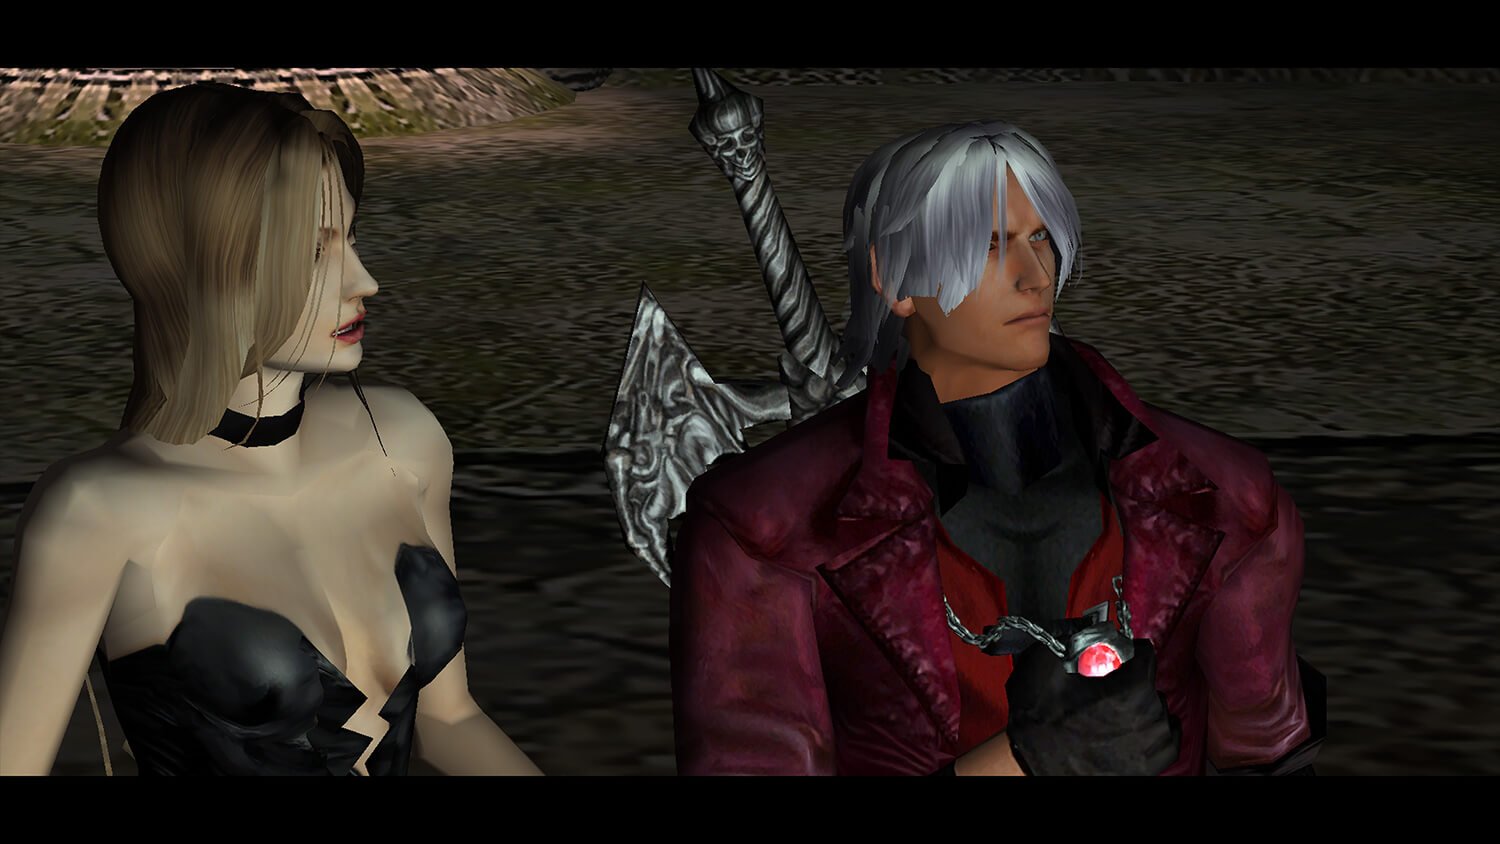 Devil May Cry [PS2 - Beta] - Unseen64